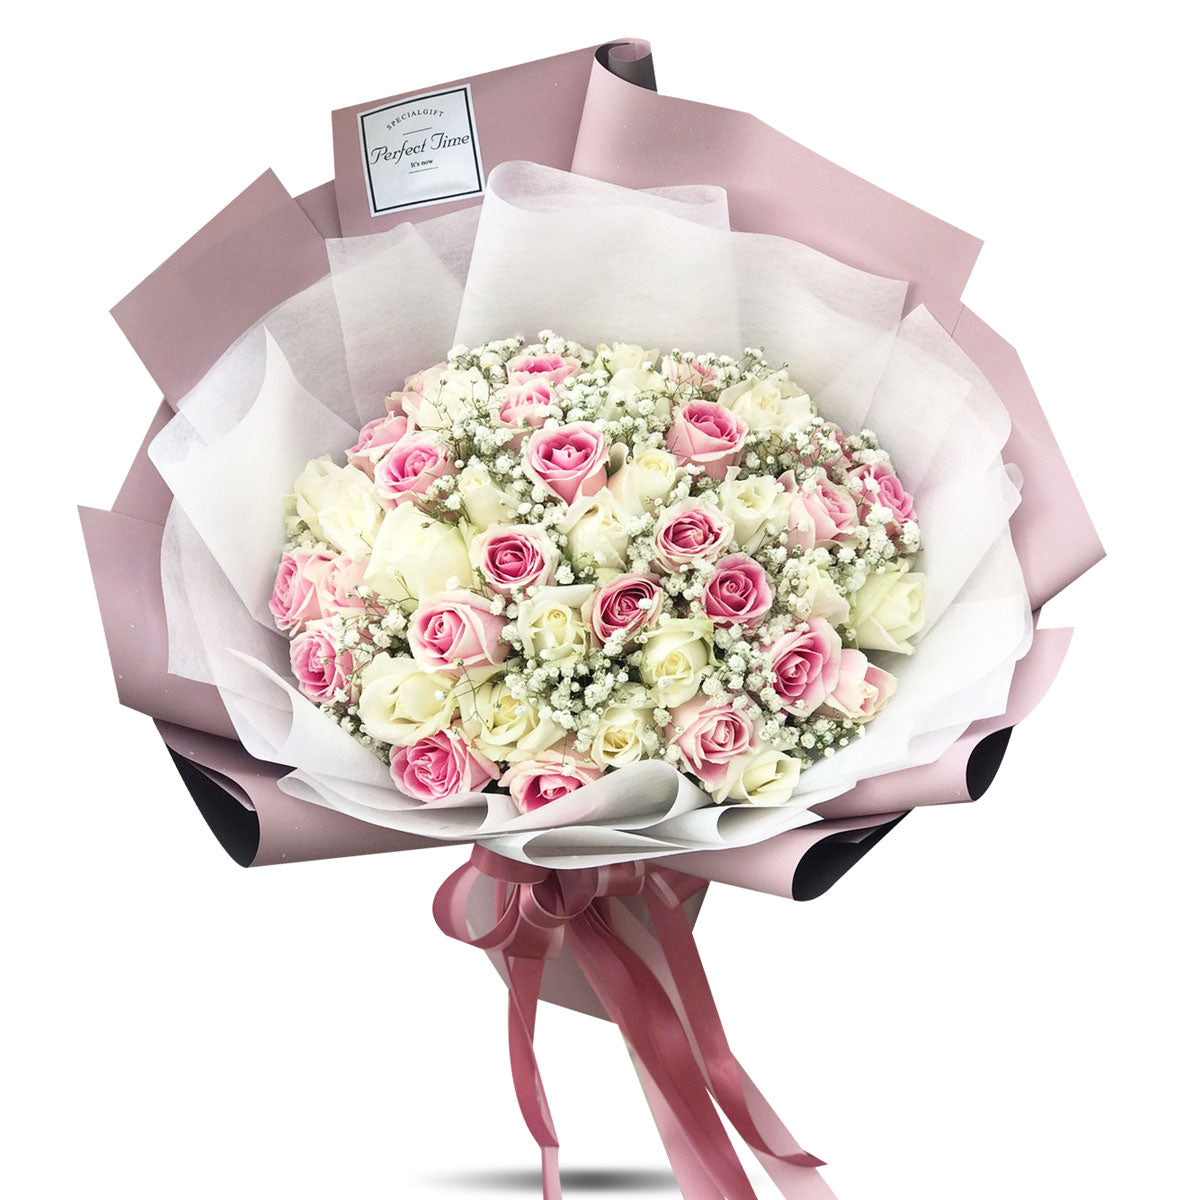 "Marvelous" Bouquet Of 50 Roses With Gypsy